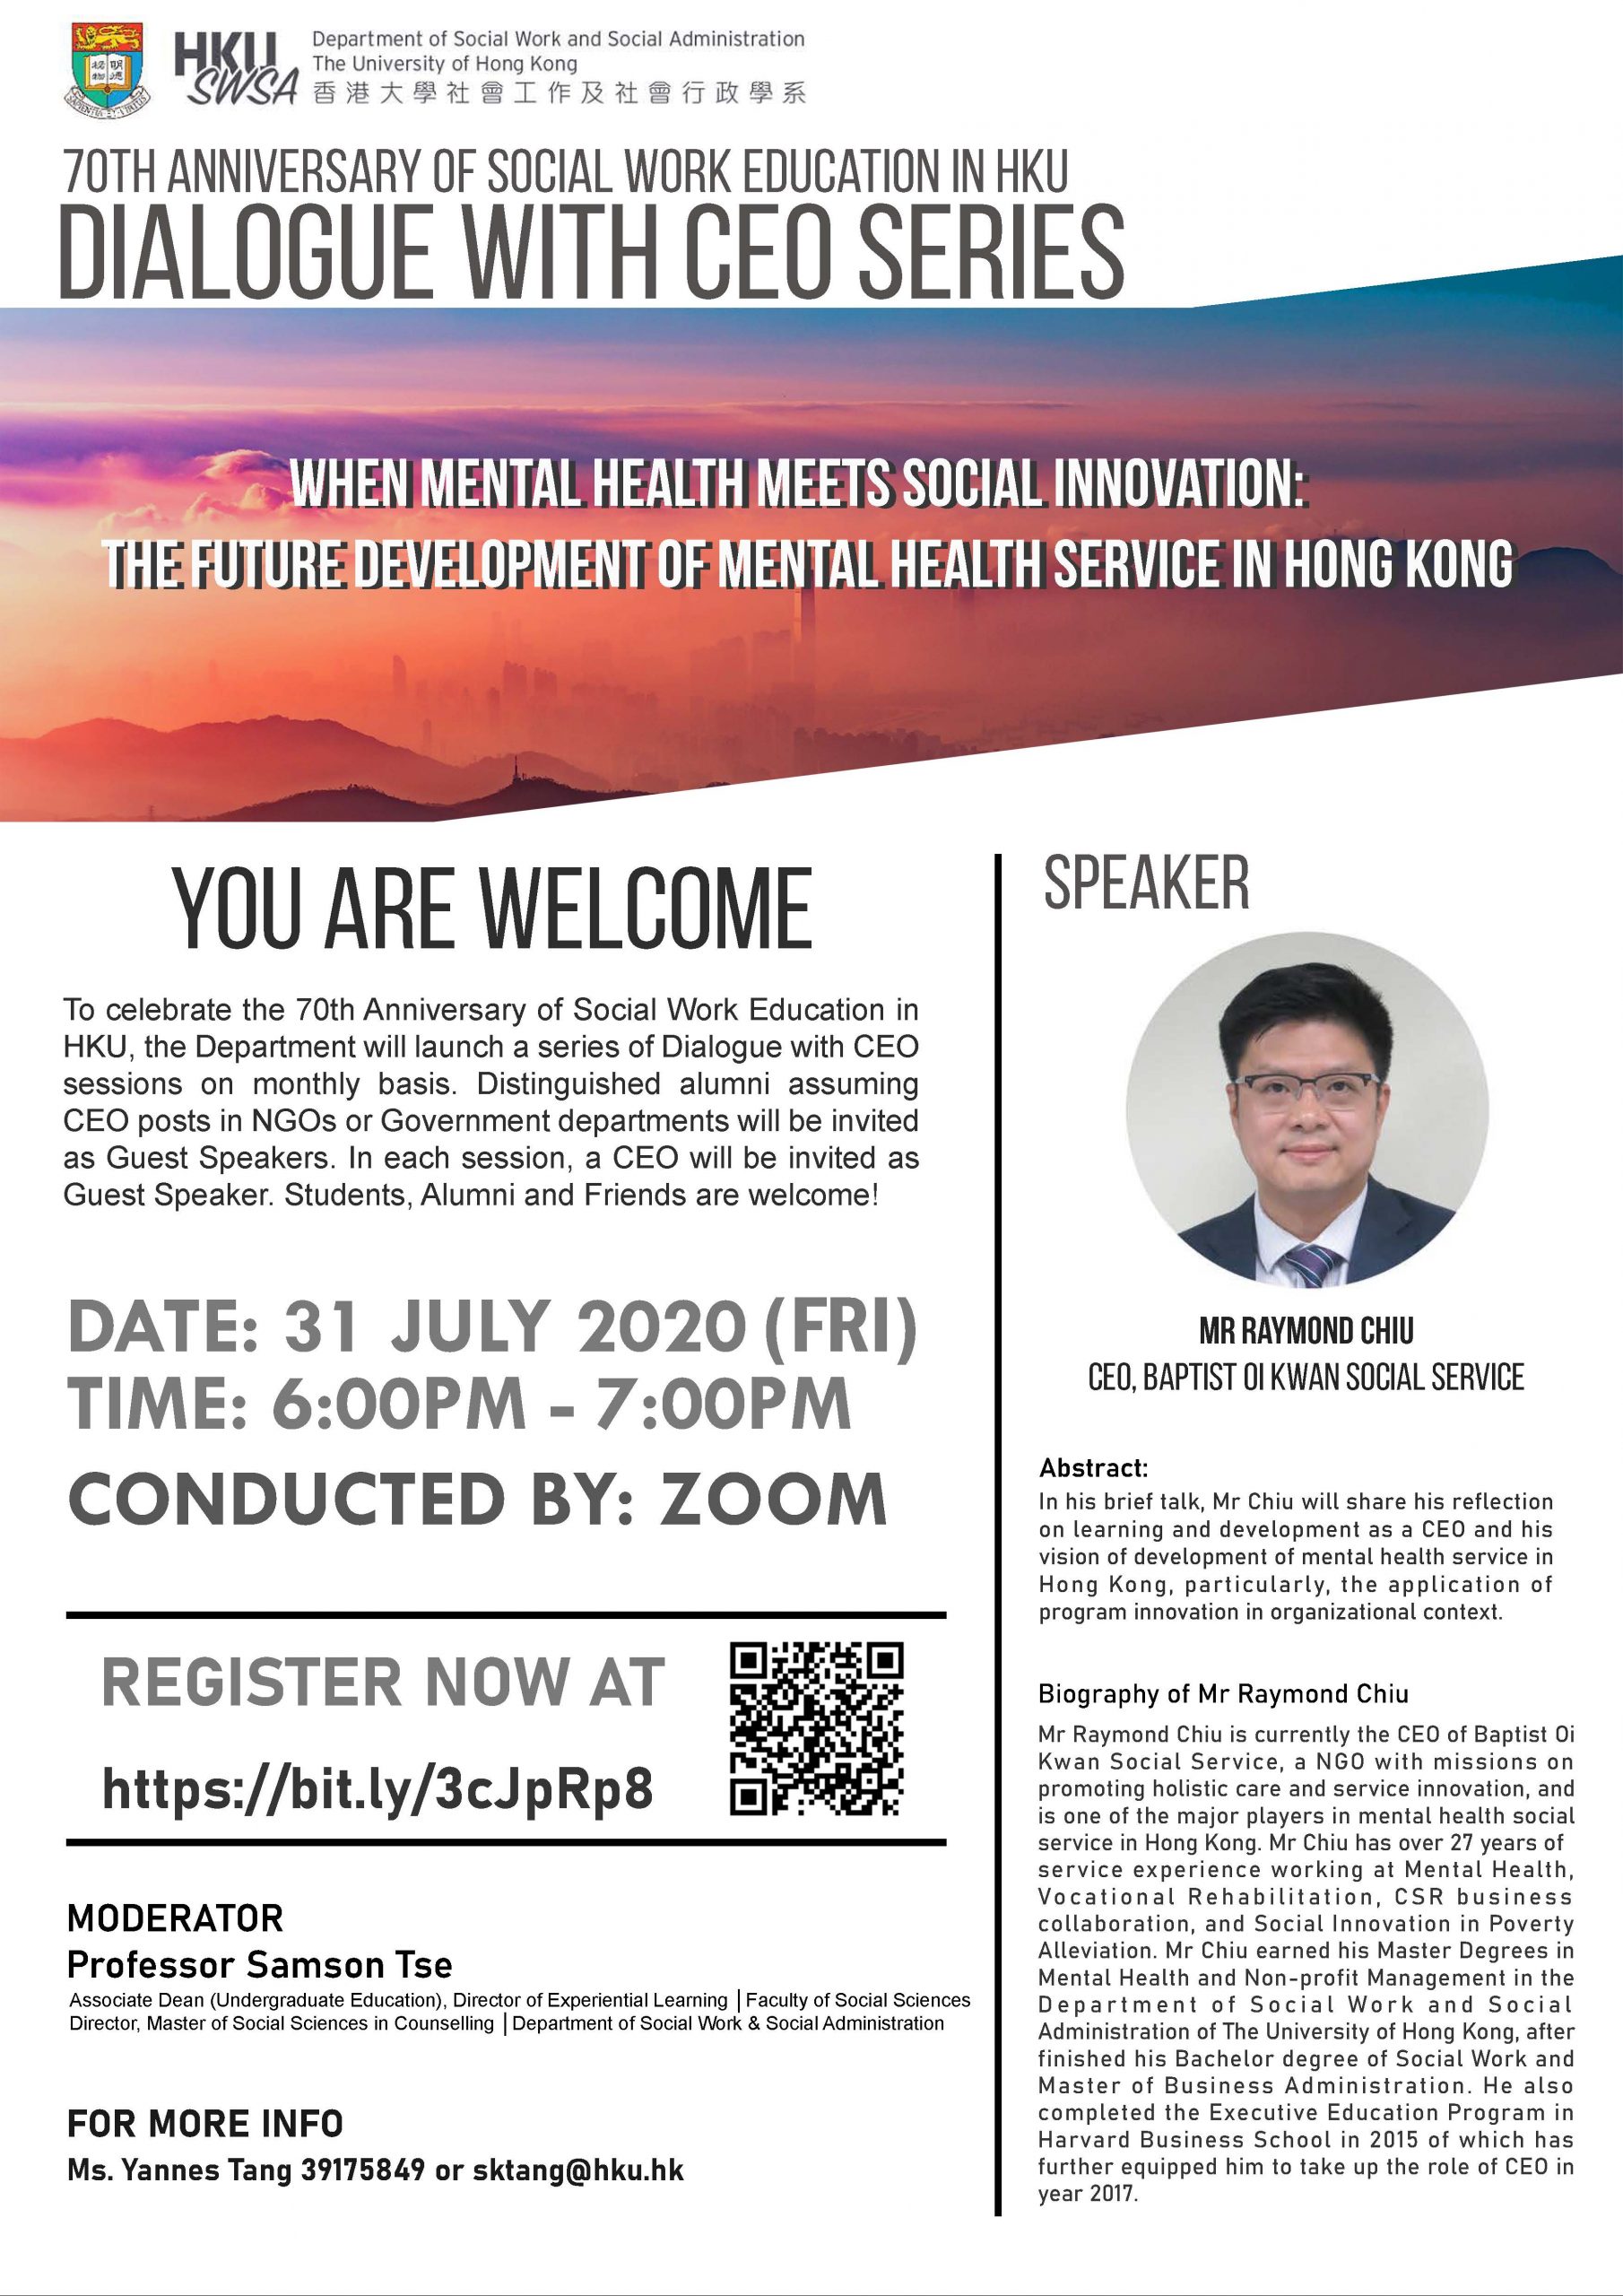 When Mental Health meets Social Innovation: the Future Development of Mental Health Service in Hong Kong